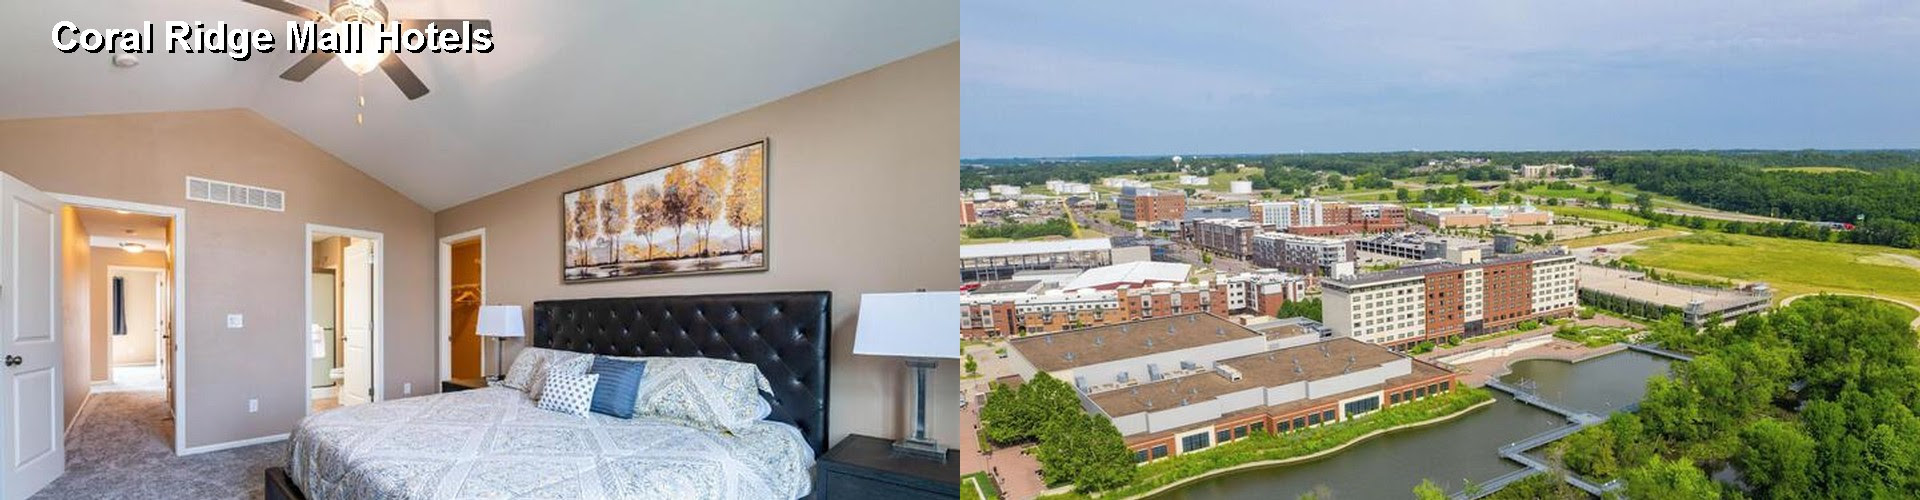 45+ BEST Hotels Near Coral Ridge Mall in Coralville IA